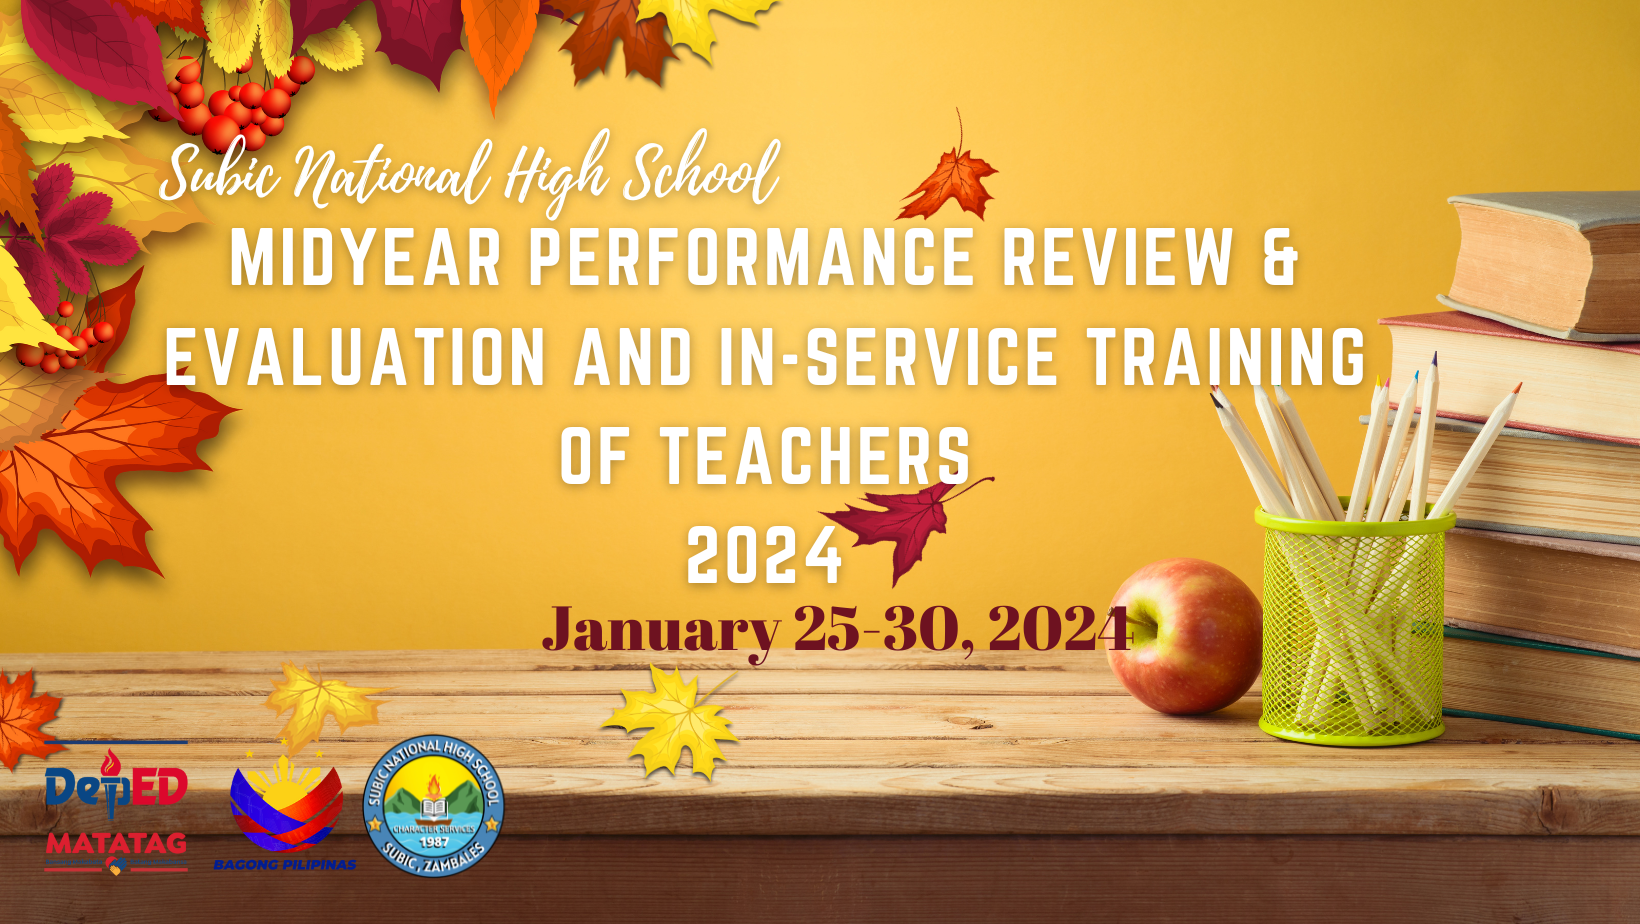 MIDYEAR PERFORMANCE REVIEW AND EVALUATION 2024